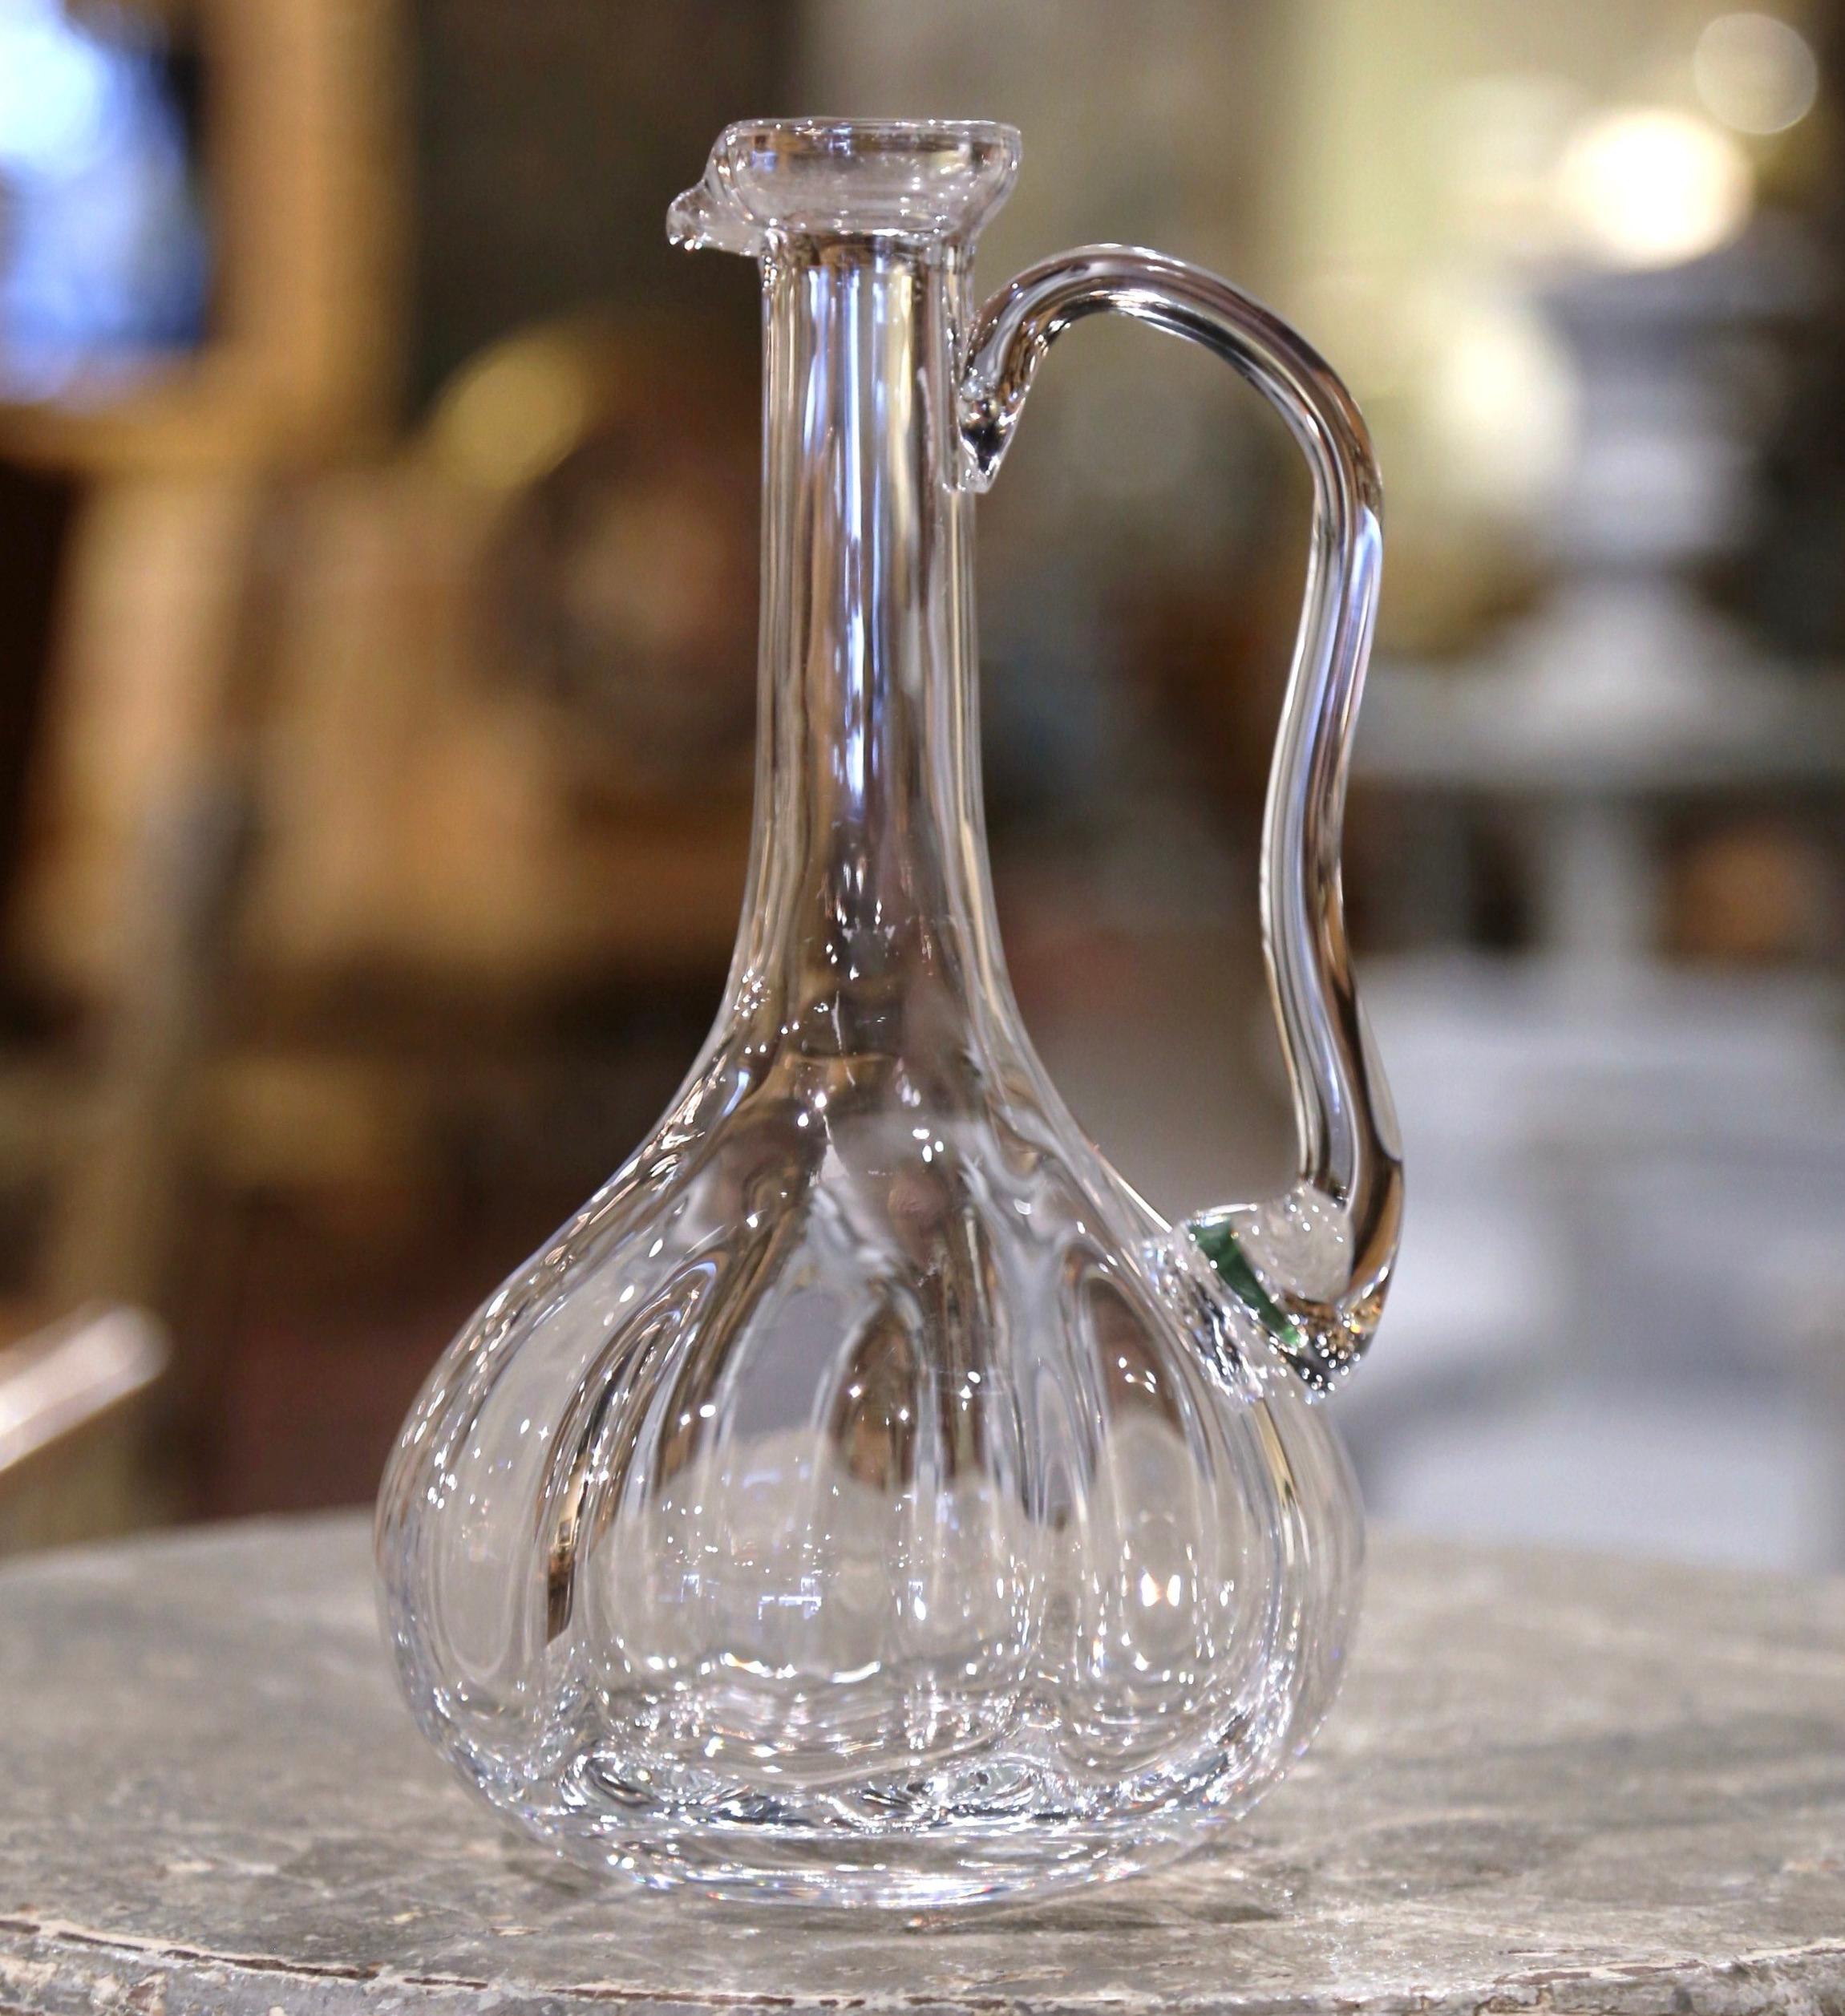 Let your red Bordeaux or Cabernet Sauvignon breeze in this elegant vintage wine carafe! Crafted in France circa 1960, the cut glass wine pitcher has the ideal shape to decant a bottle of red wine, wide at the base, with a long neck dressed with